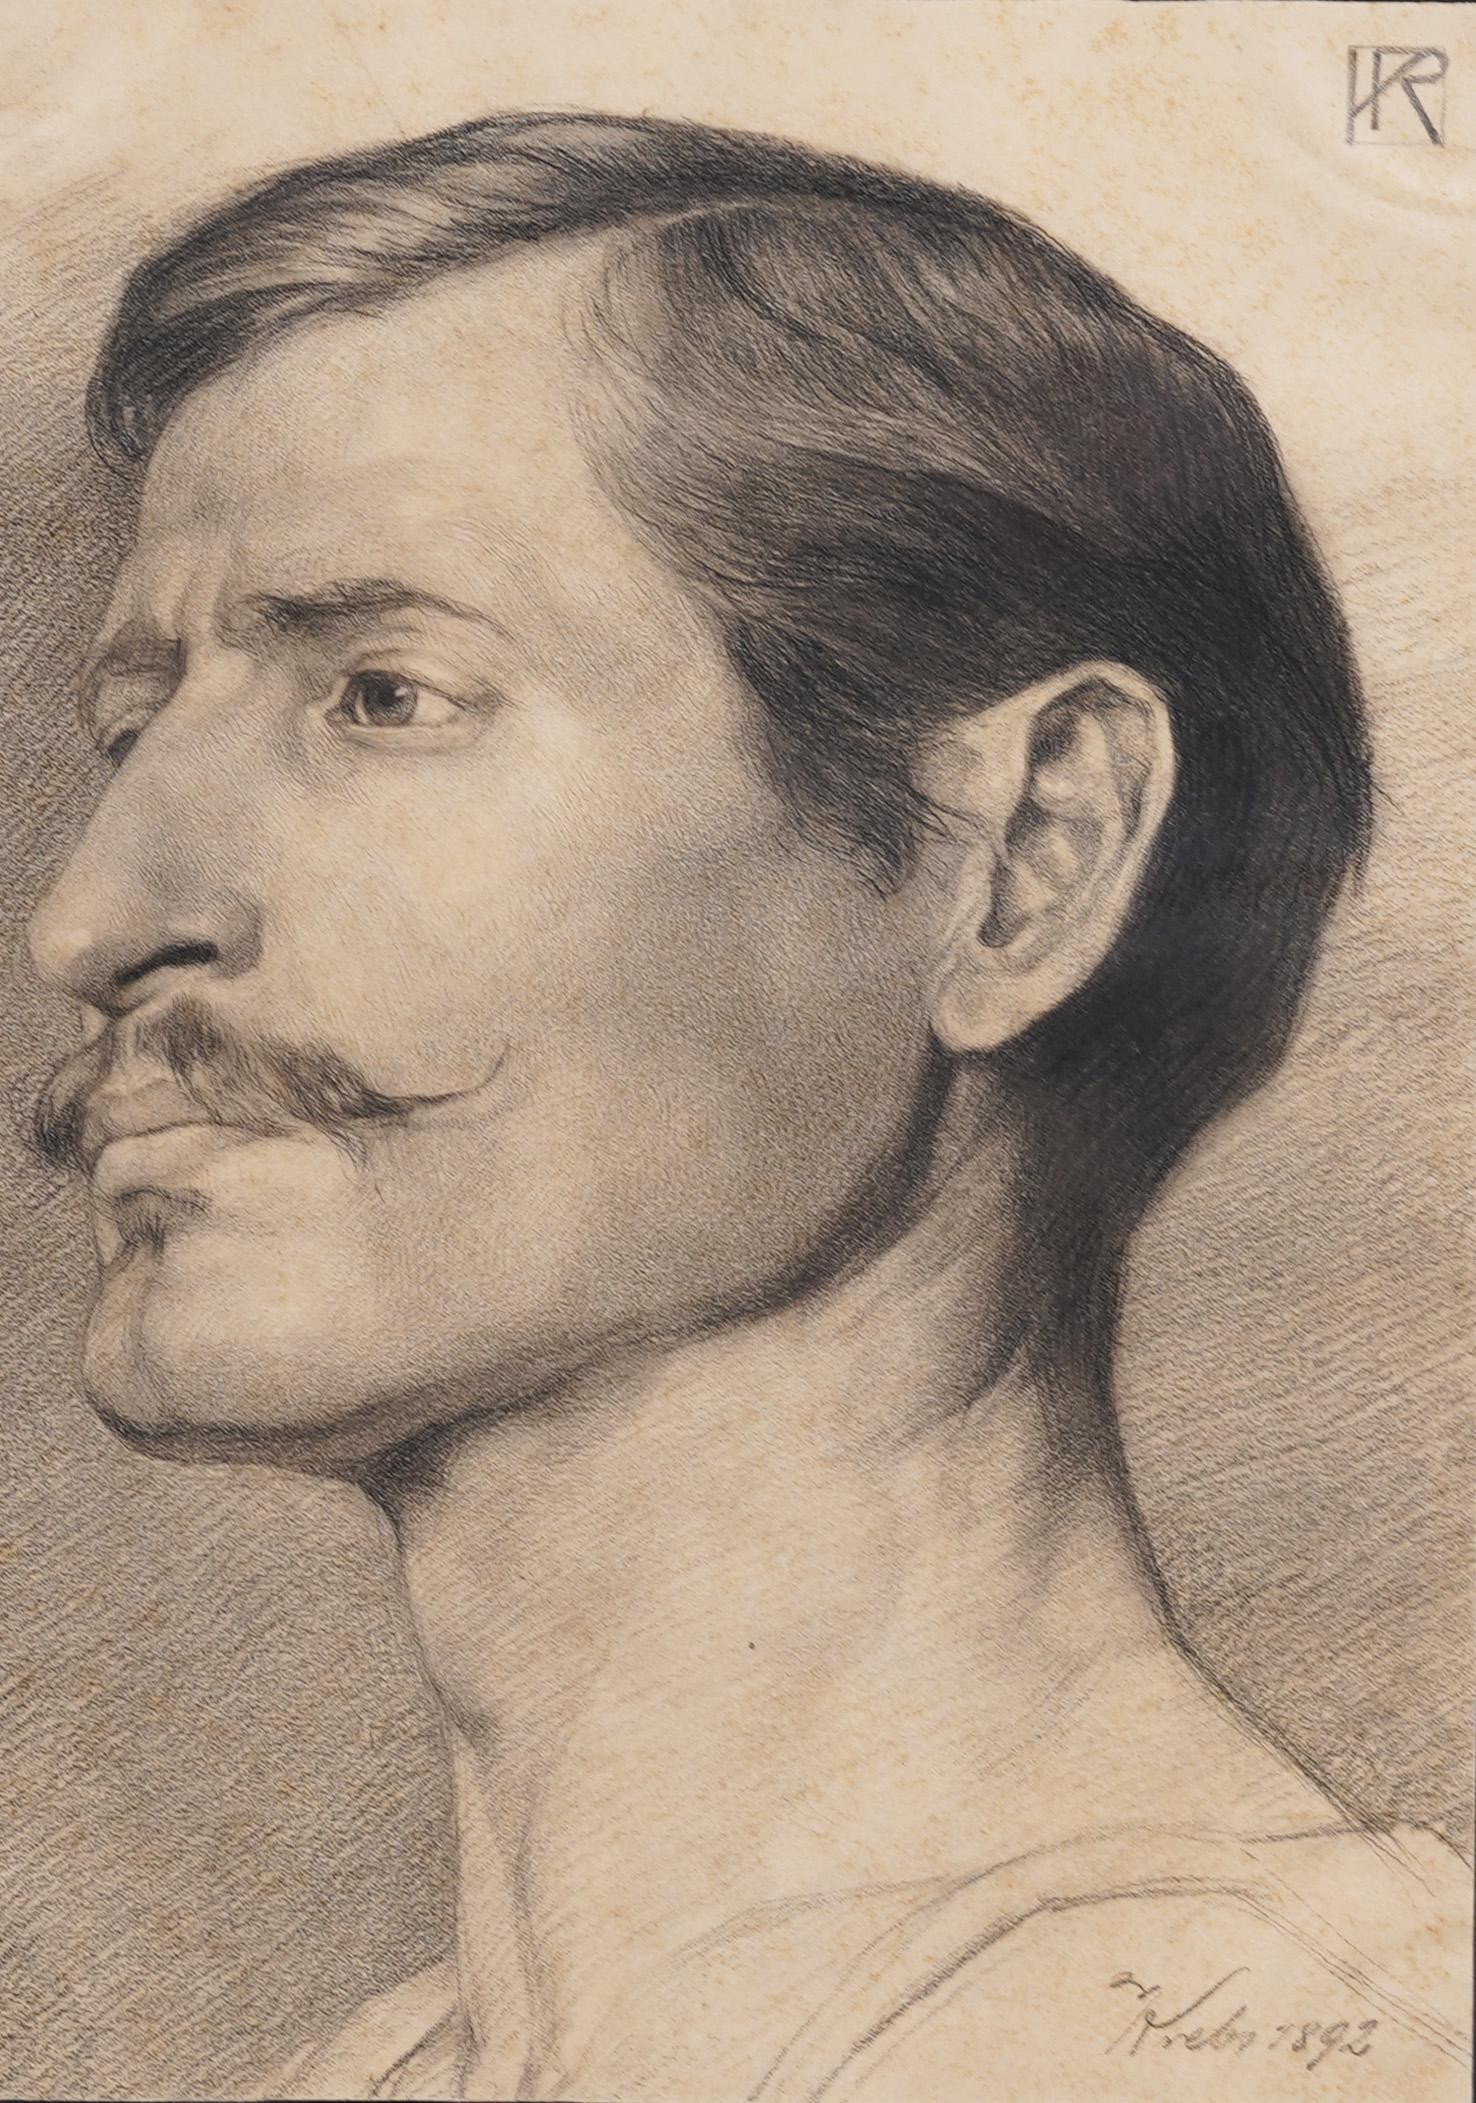 Incredibly well executed and superb subject. A 19th century portrait of a handsome young man with a mustache. Framed in a Dutch ripple wood molding. Drawing on paper. Signed and dated.